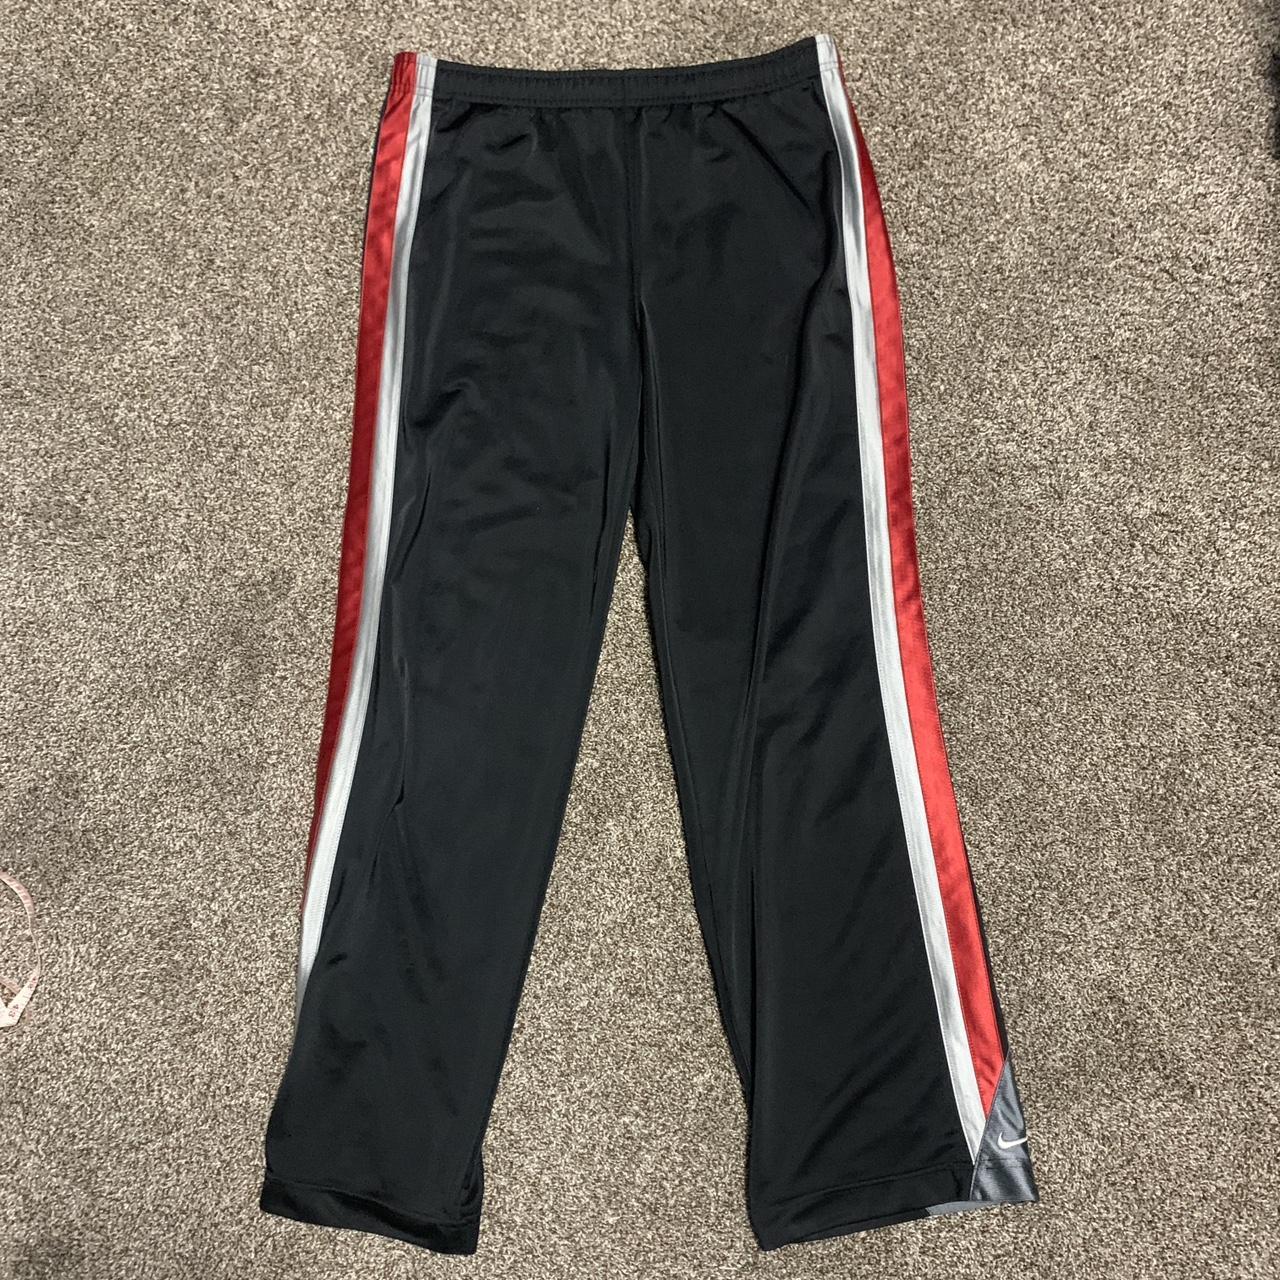 Early 2000s Nike black and red sweatpants in very...